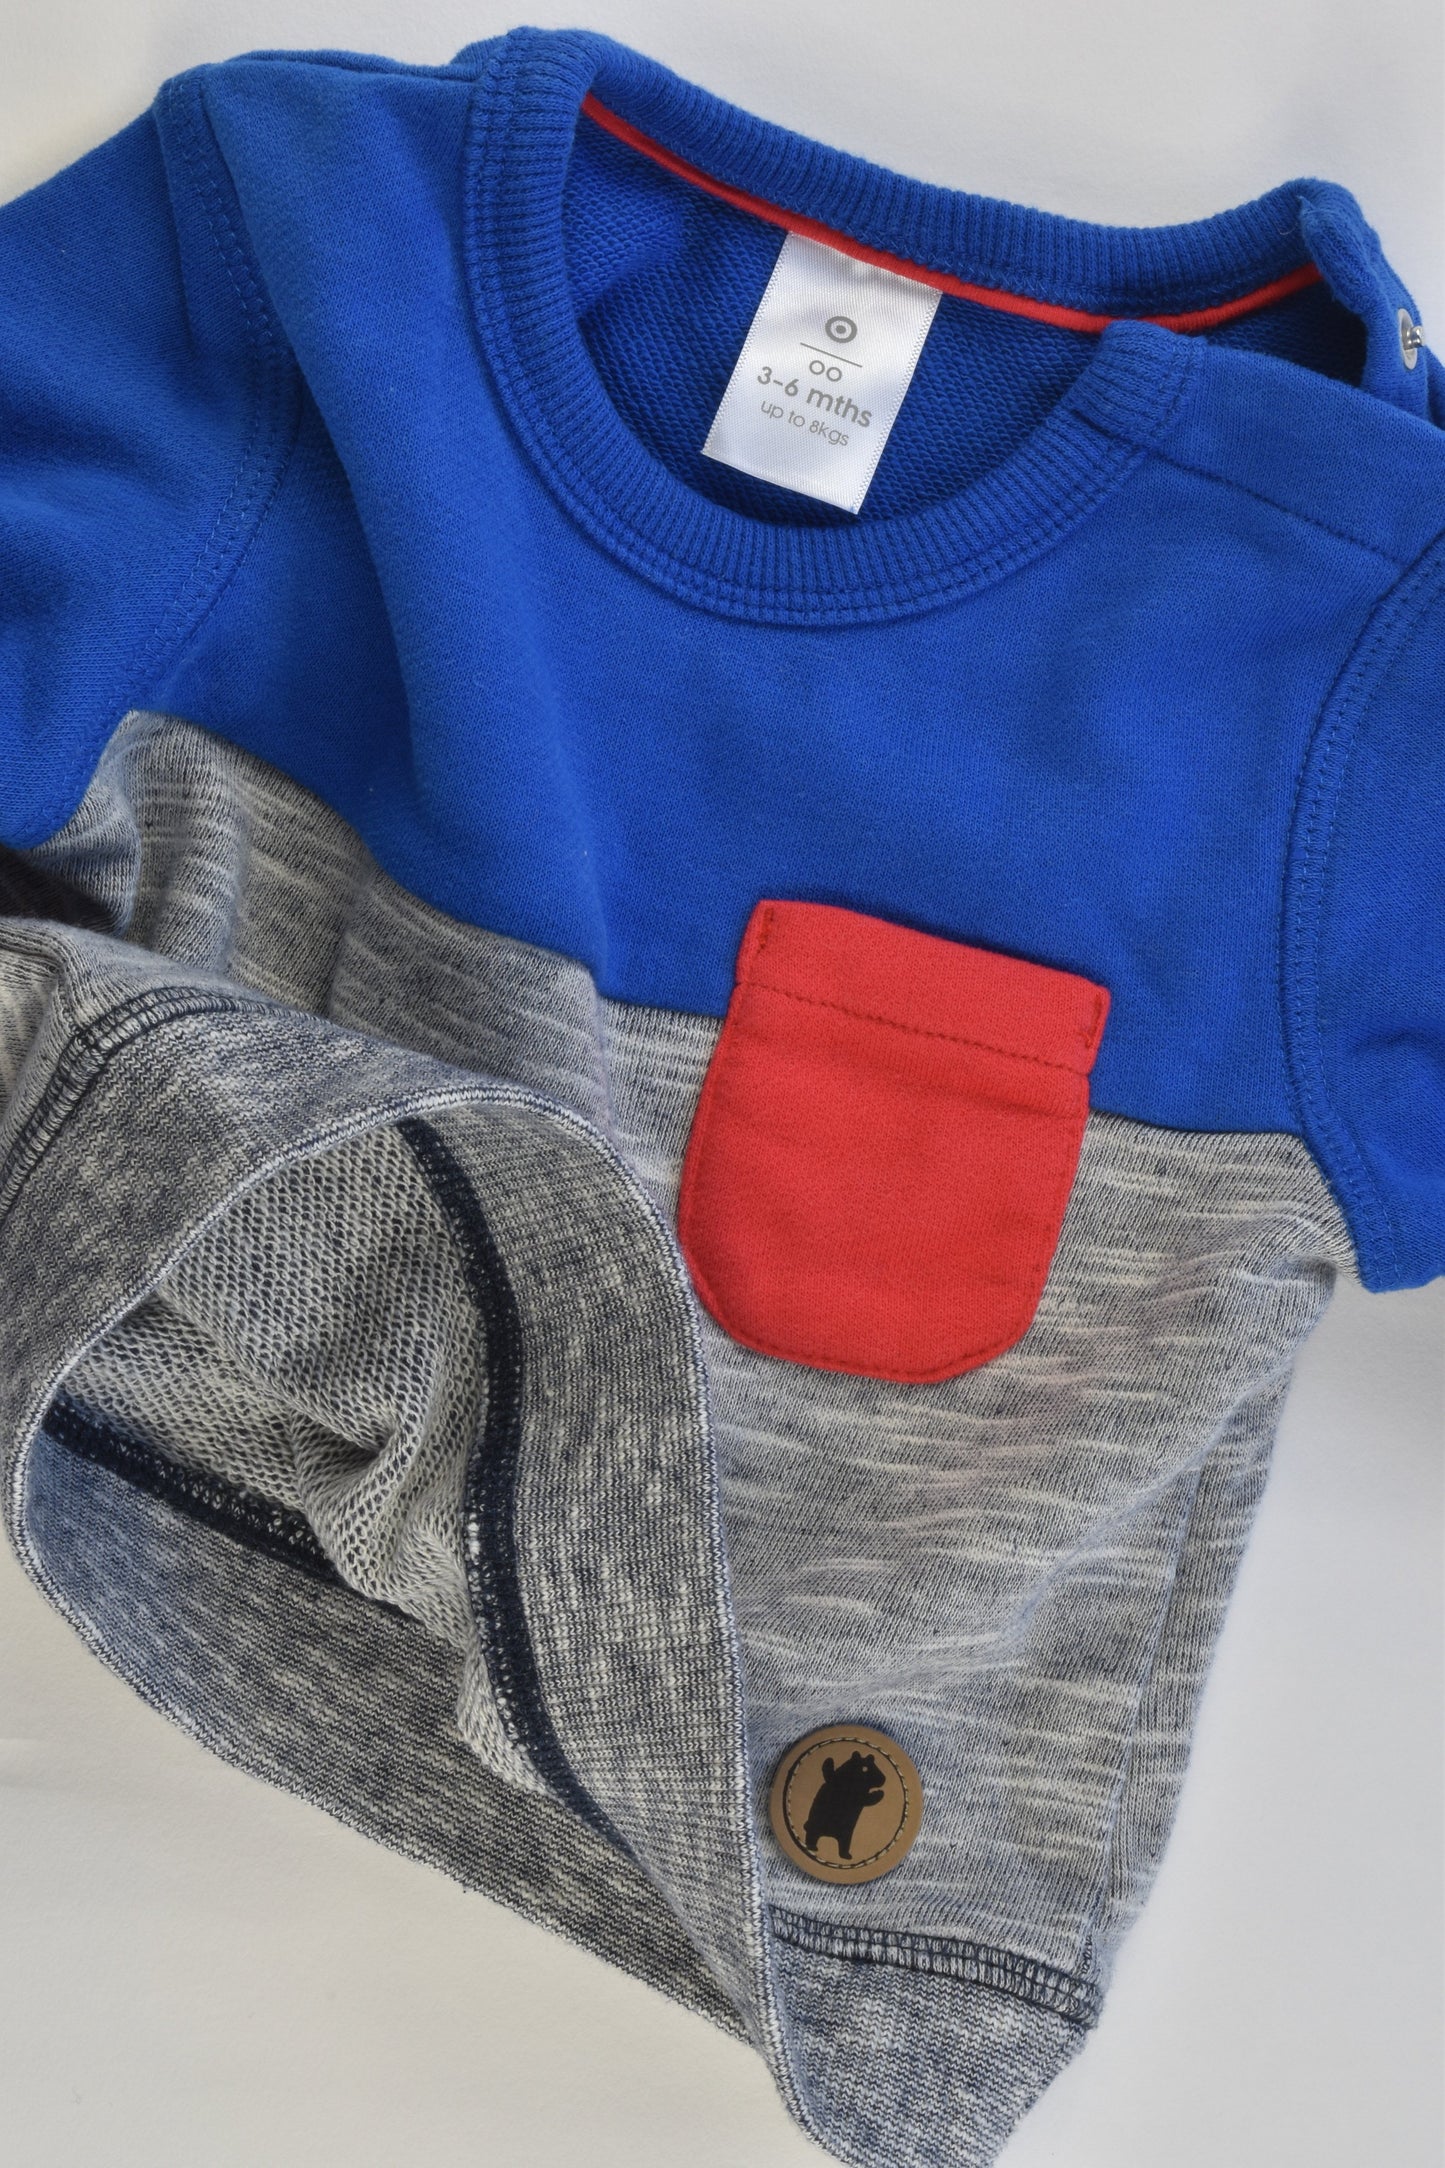 Target Size 00 (3-6 months) Sweater